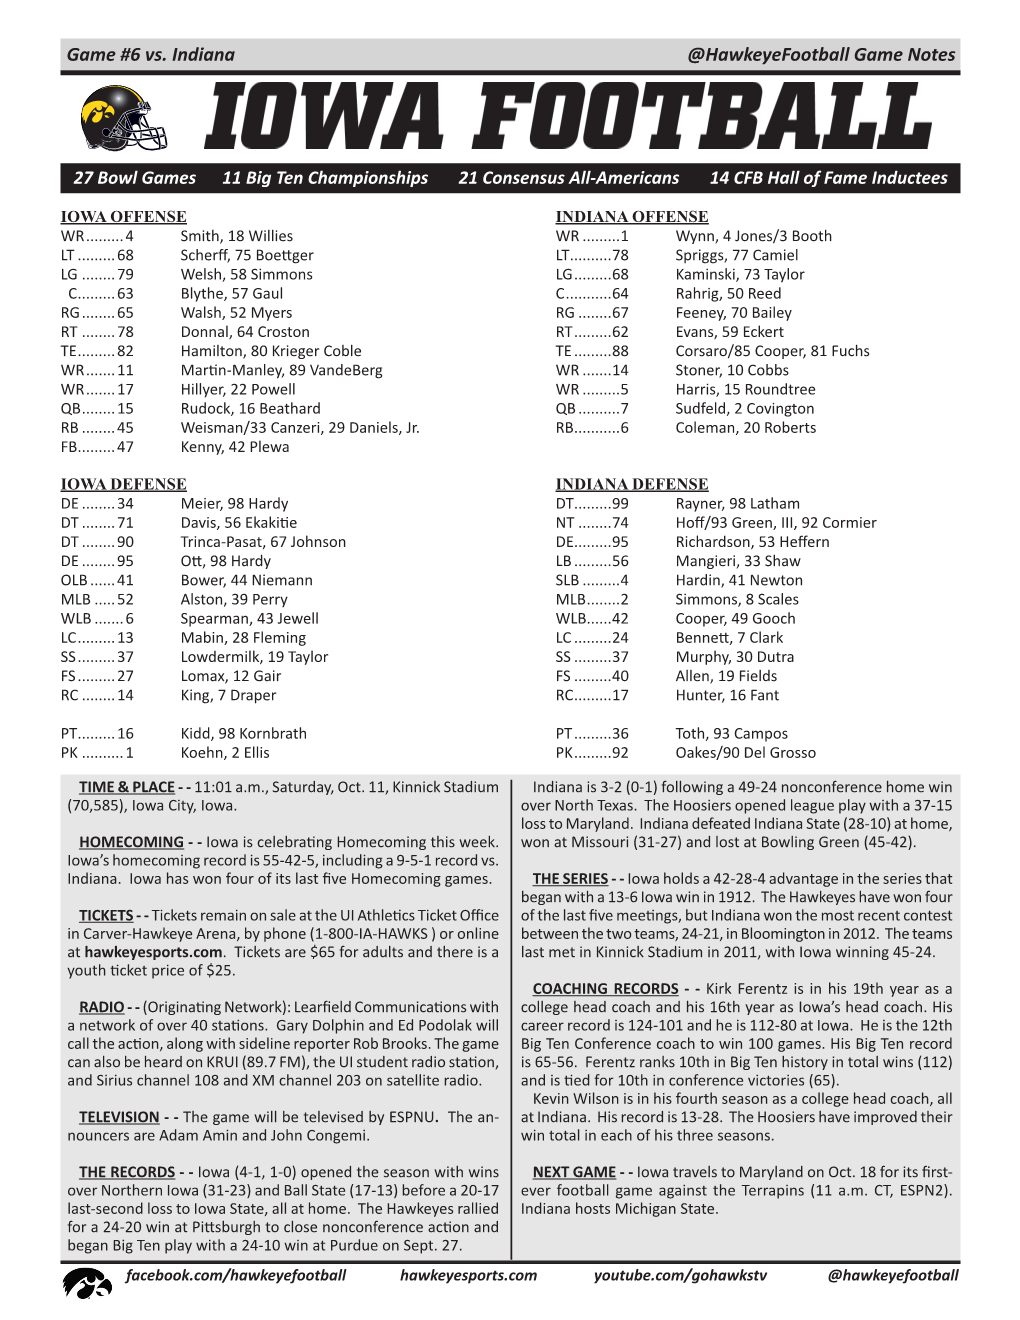 @Hawkeyefootball Game Notes Game #6 Vs. Indiana